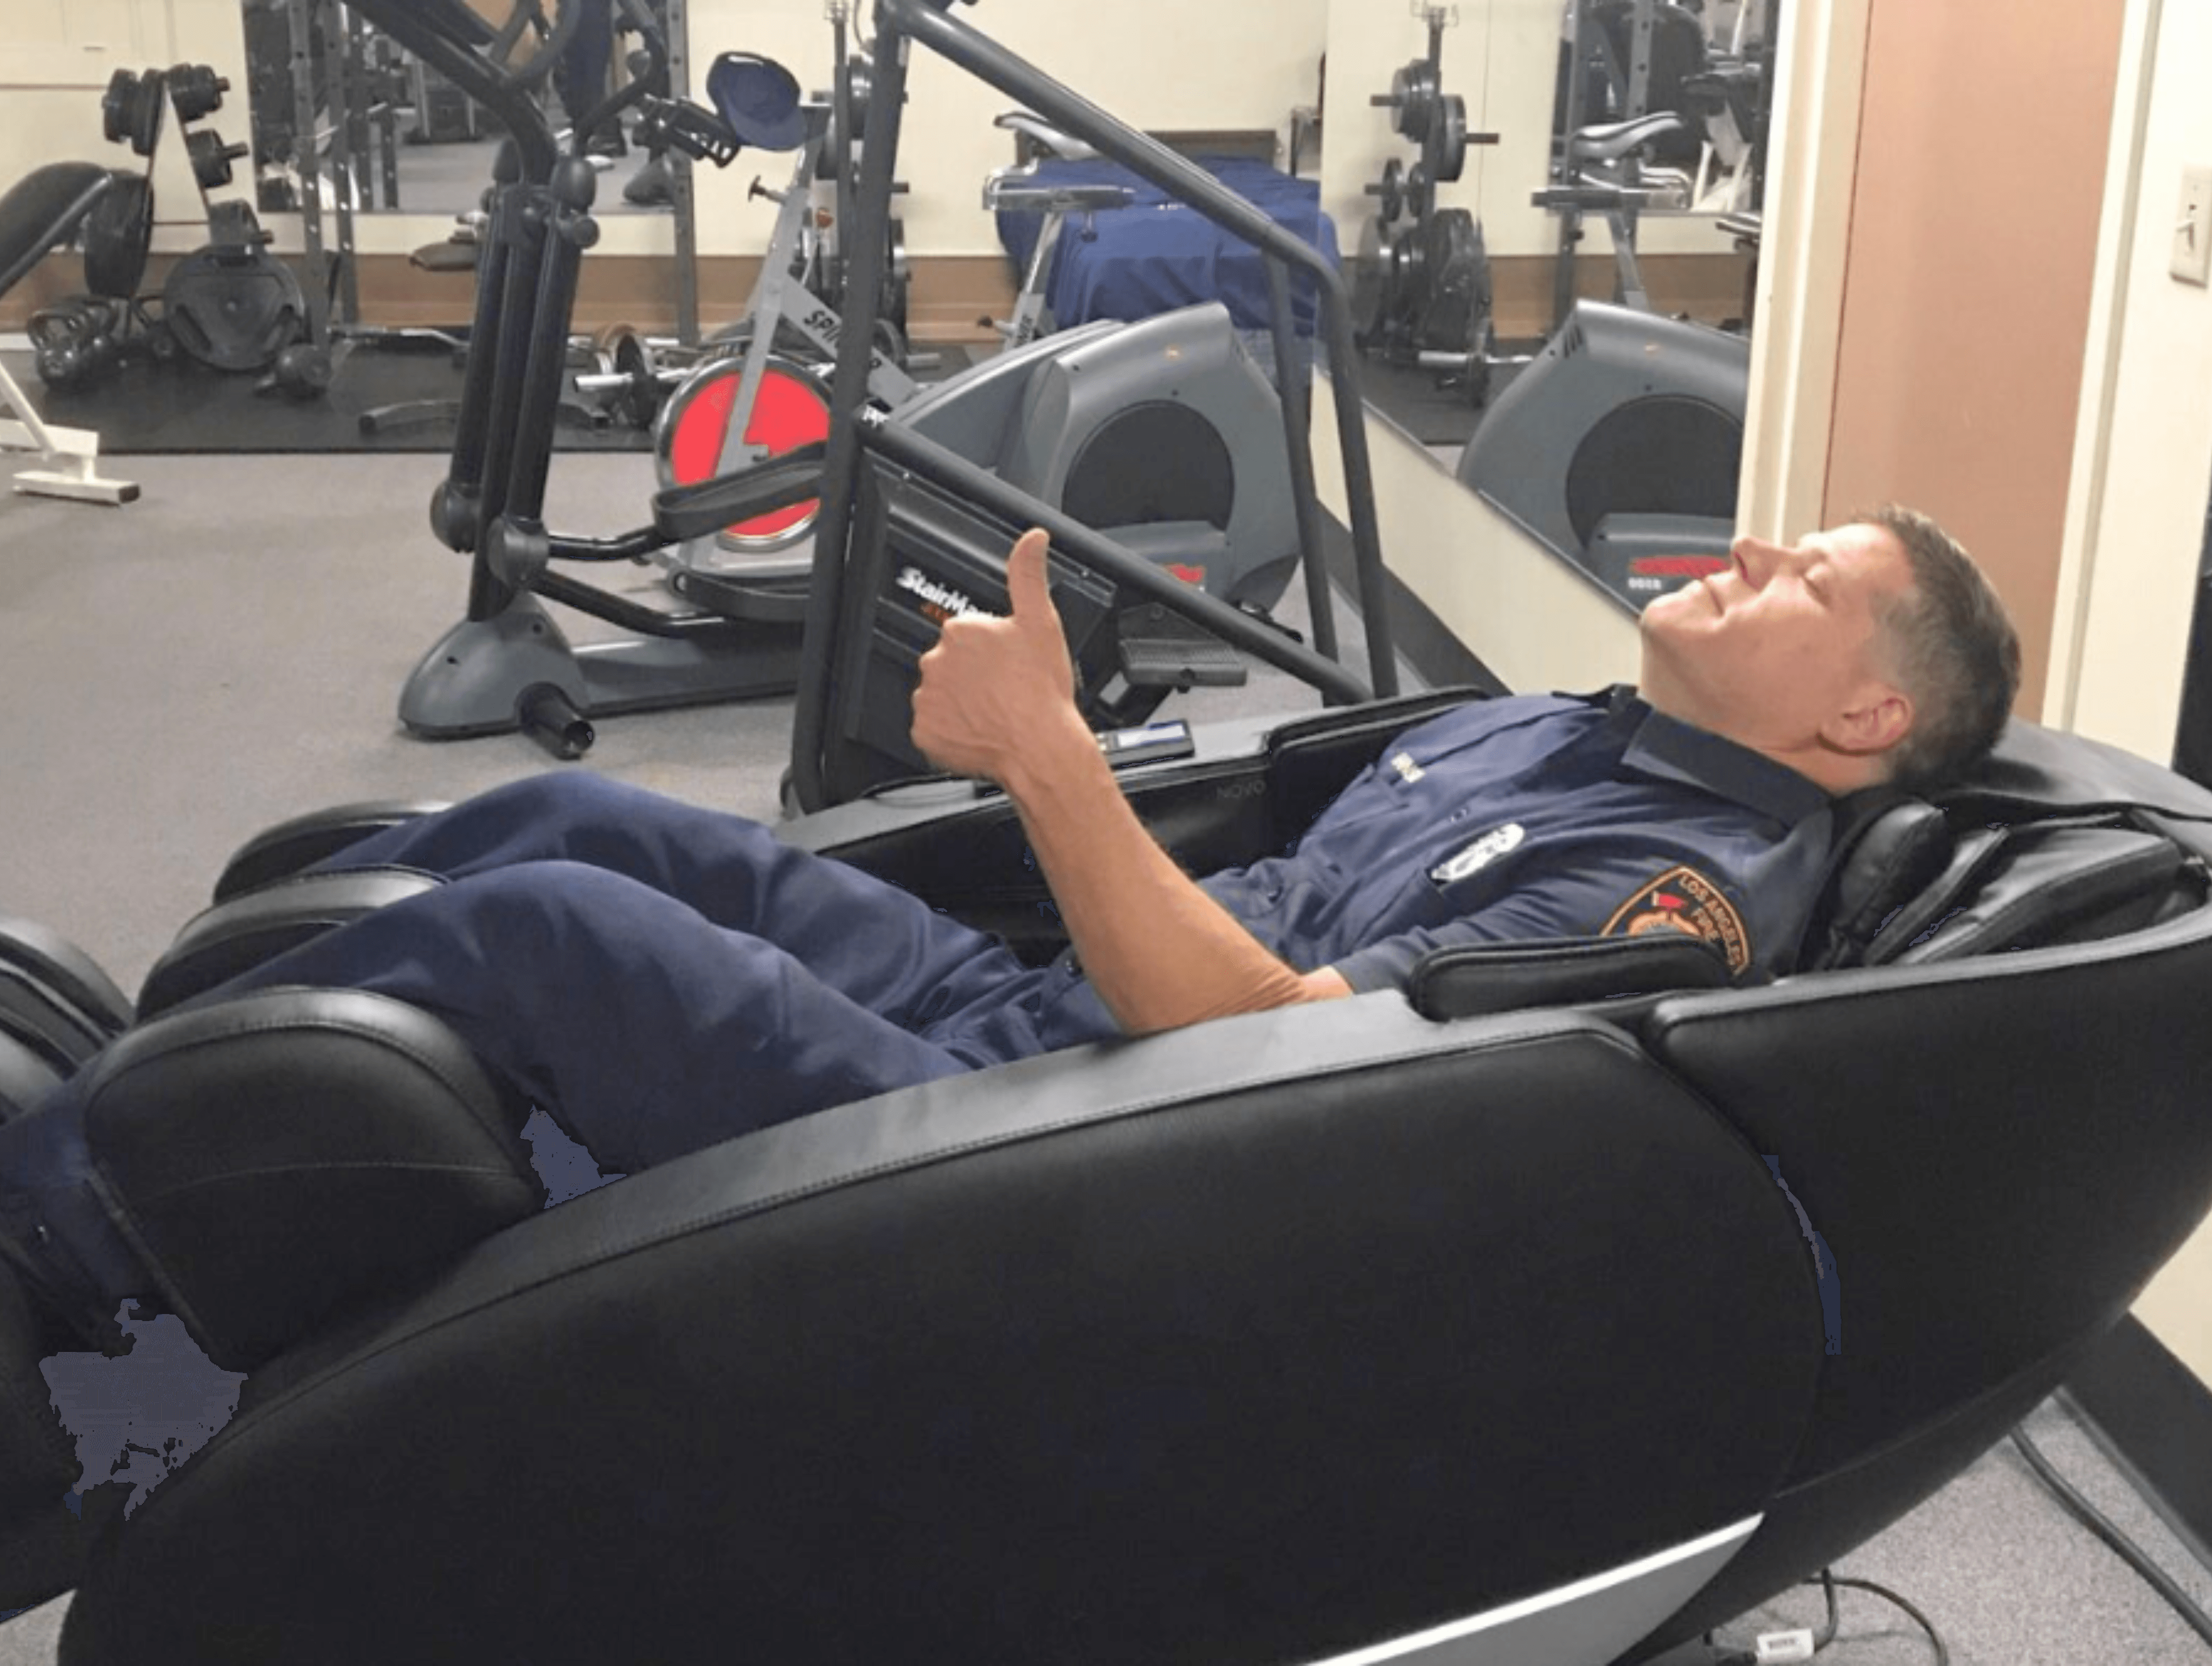 Human Touch Impacts Firefighter Rest and Recovery